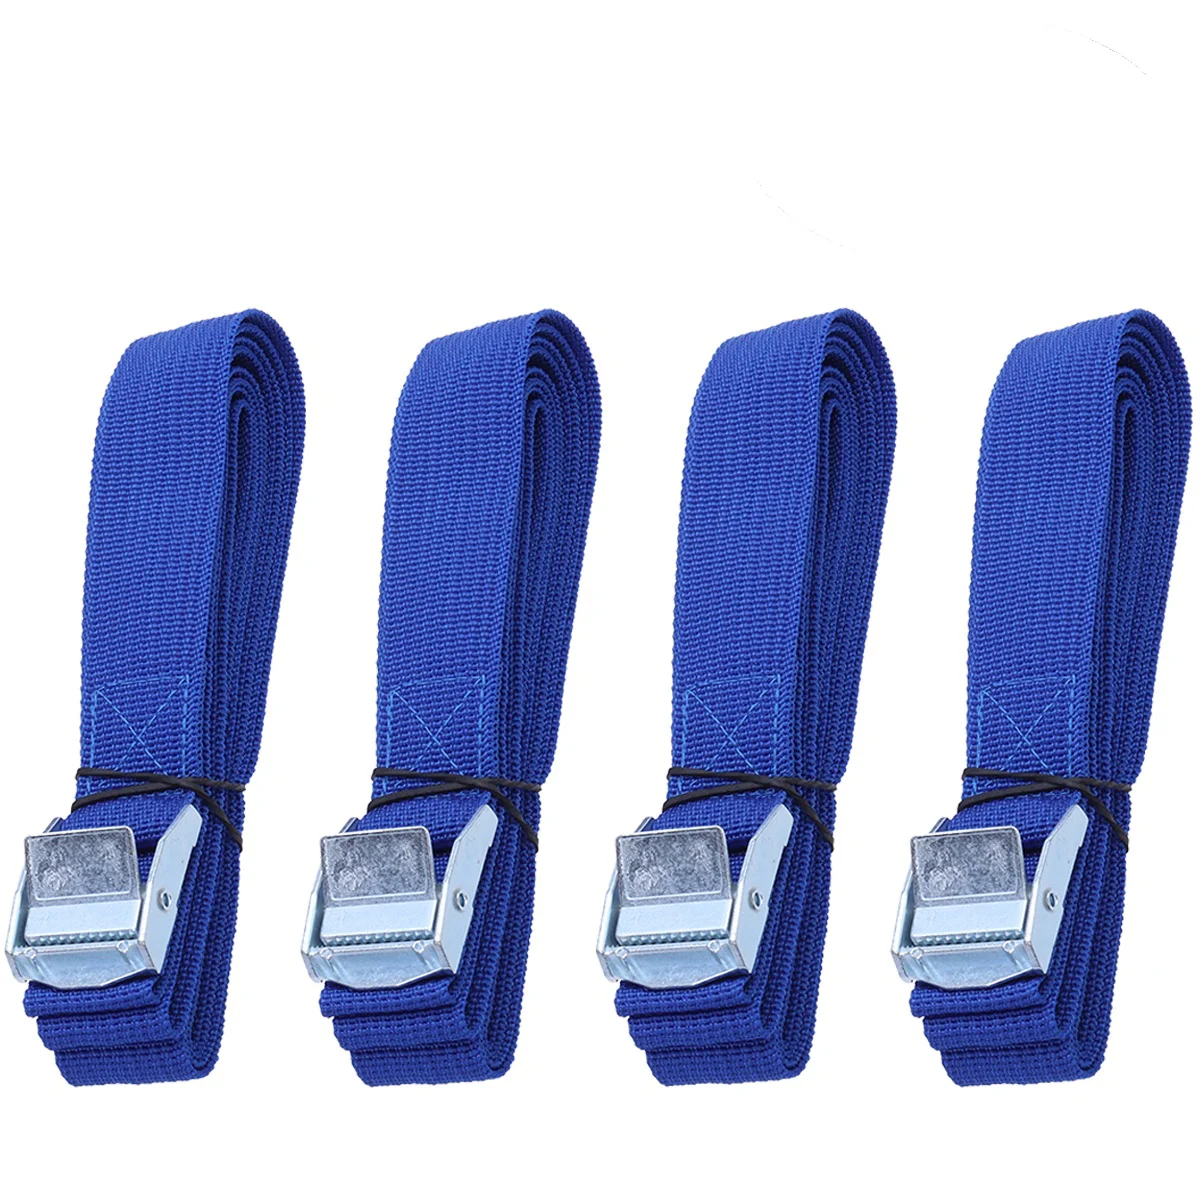 

6/8Pcs Auto Lashing Straps With Buckle Nylon Car Straps For Cargo Tie Down Car Roof Rack Luggage Kayak Carrier Ratchet Belt